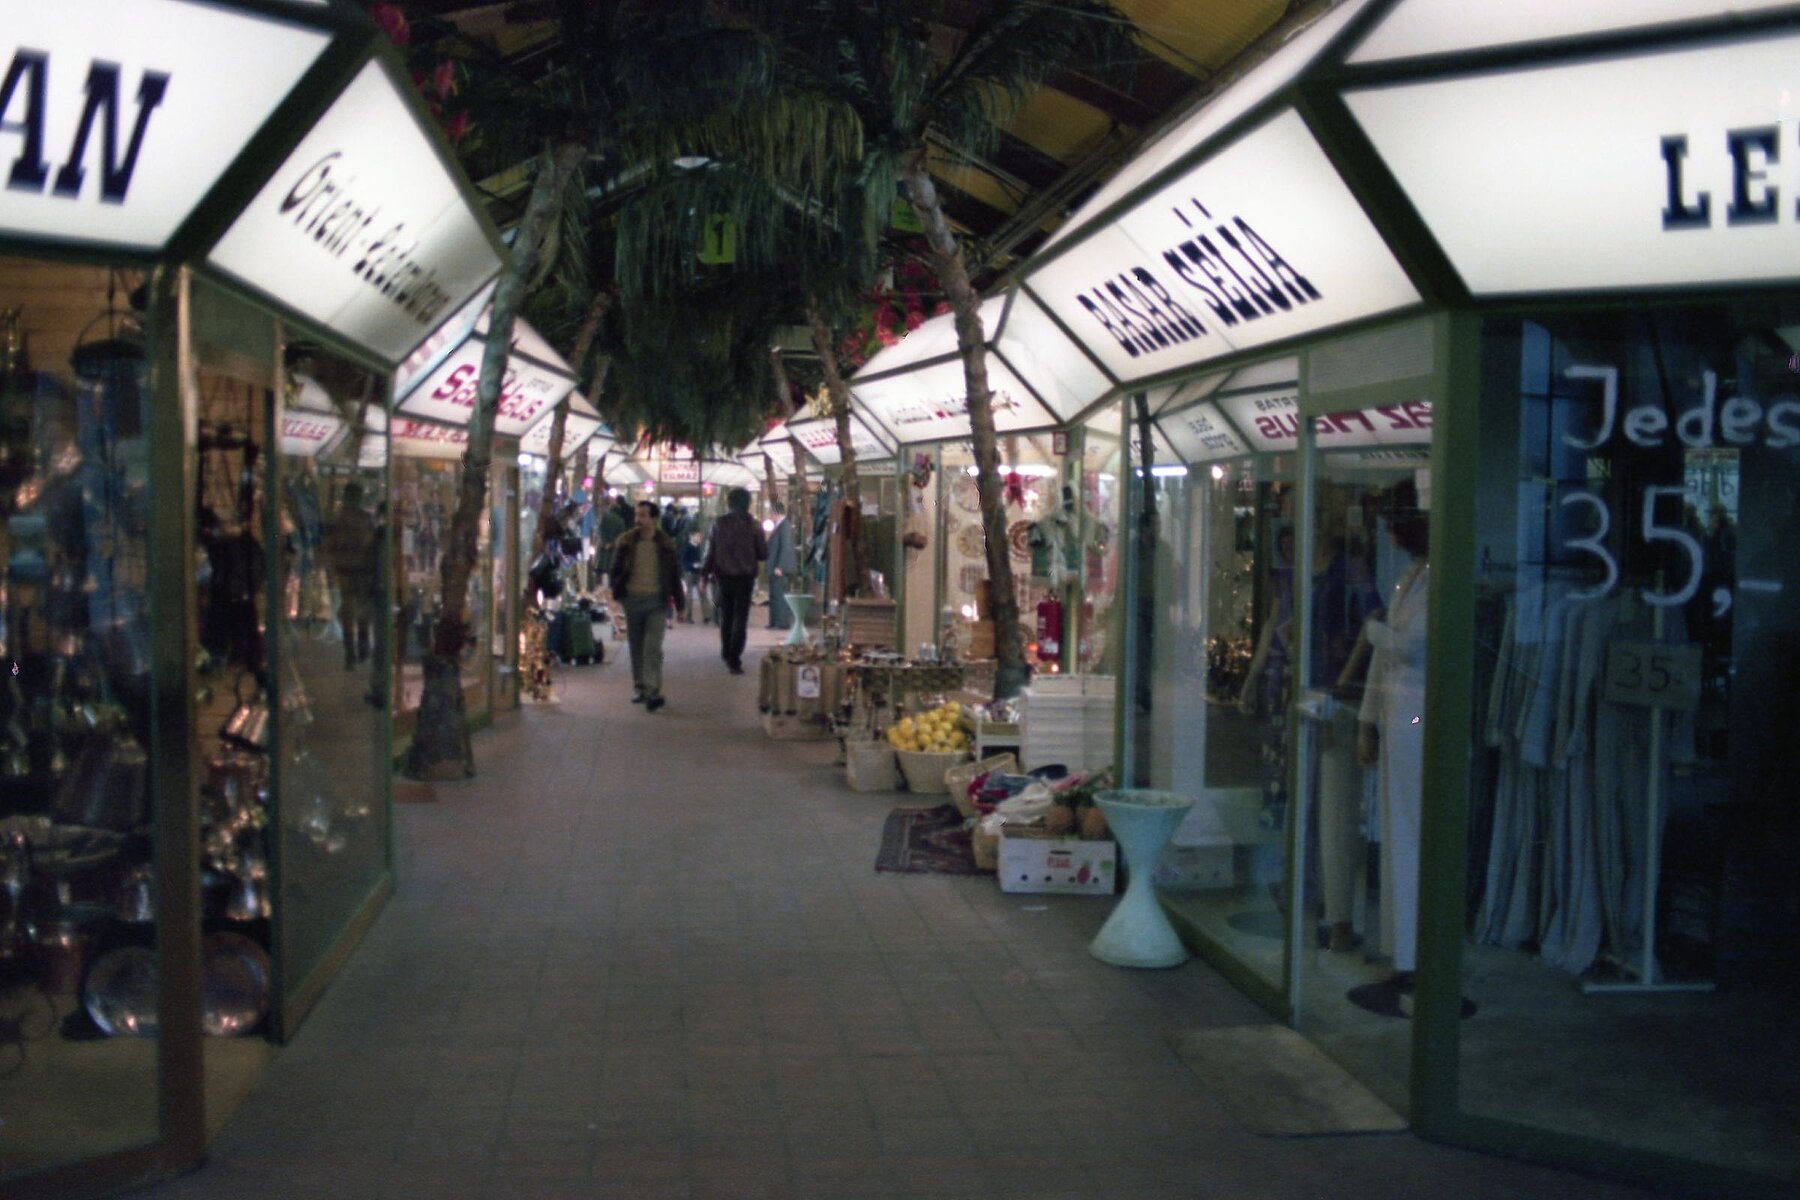 Various shops with household goods, clothing and food inside the Turkish Bazaar on the left and right side. People walk through the central aisle.